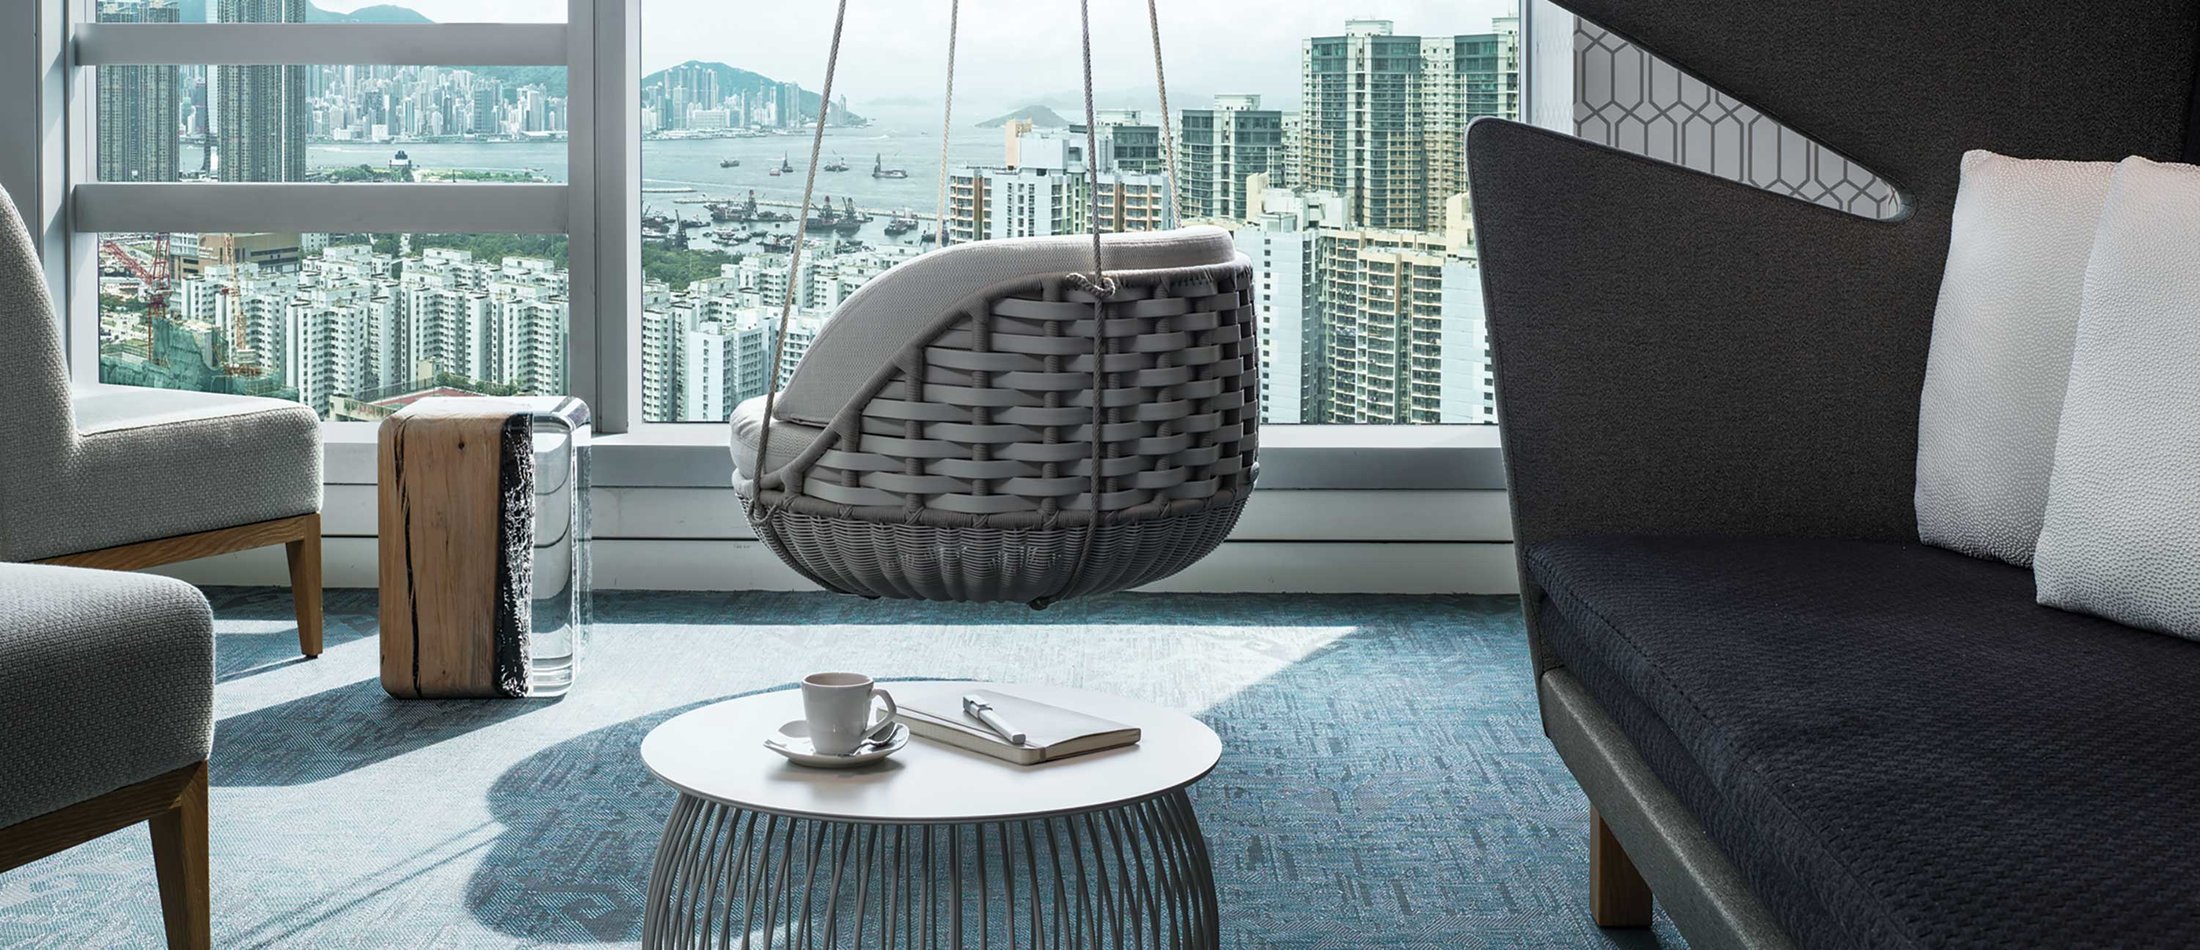 Bolon flooring in the Cordis Hotel in Hong Kong, China